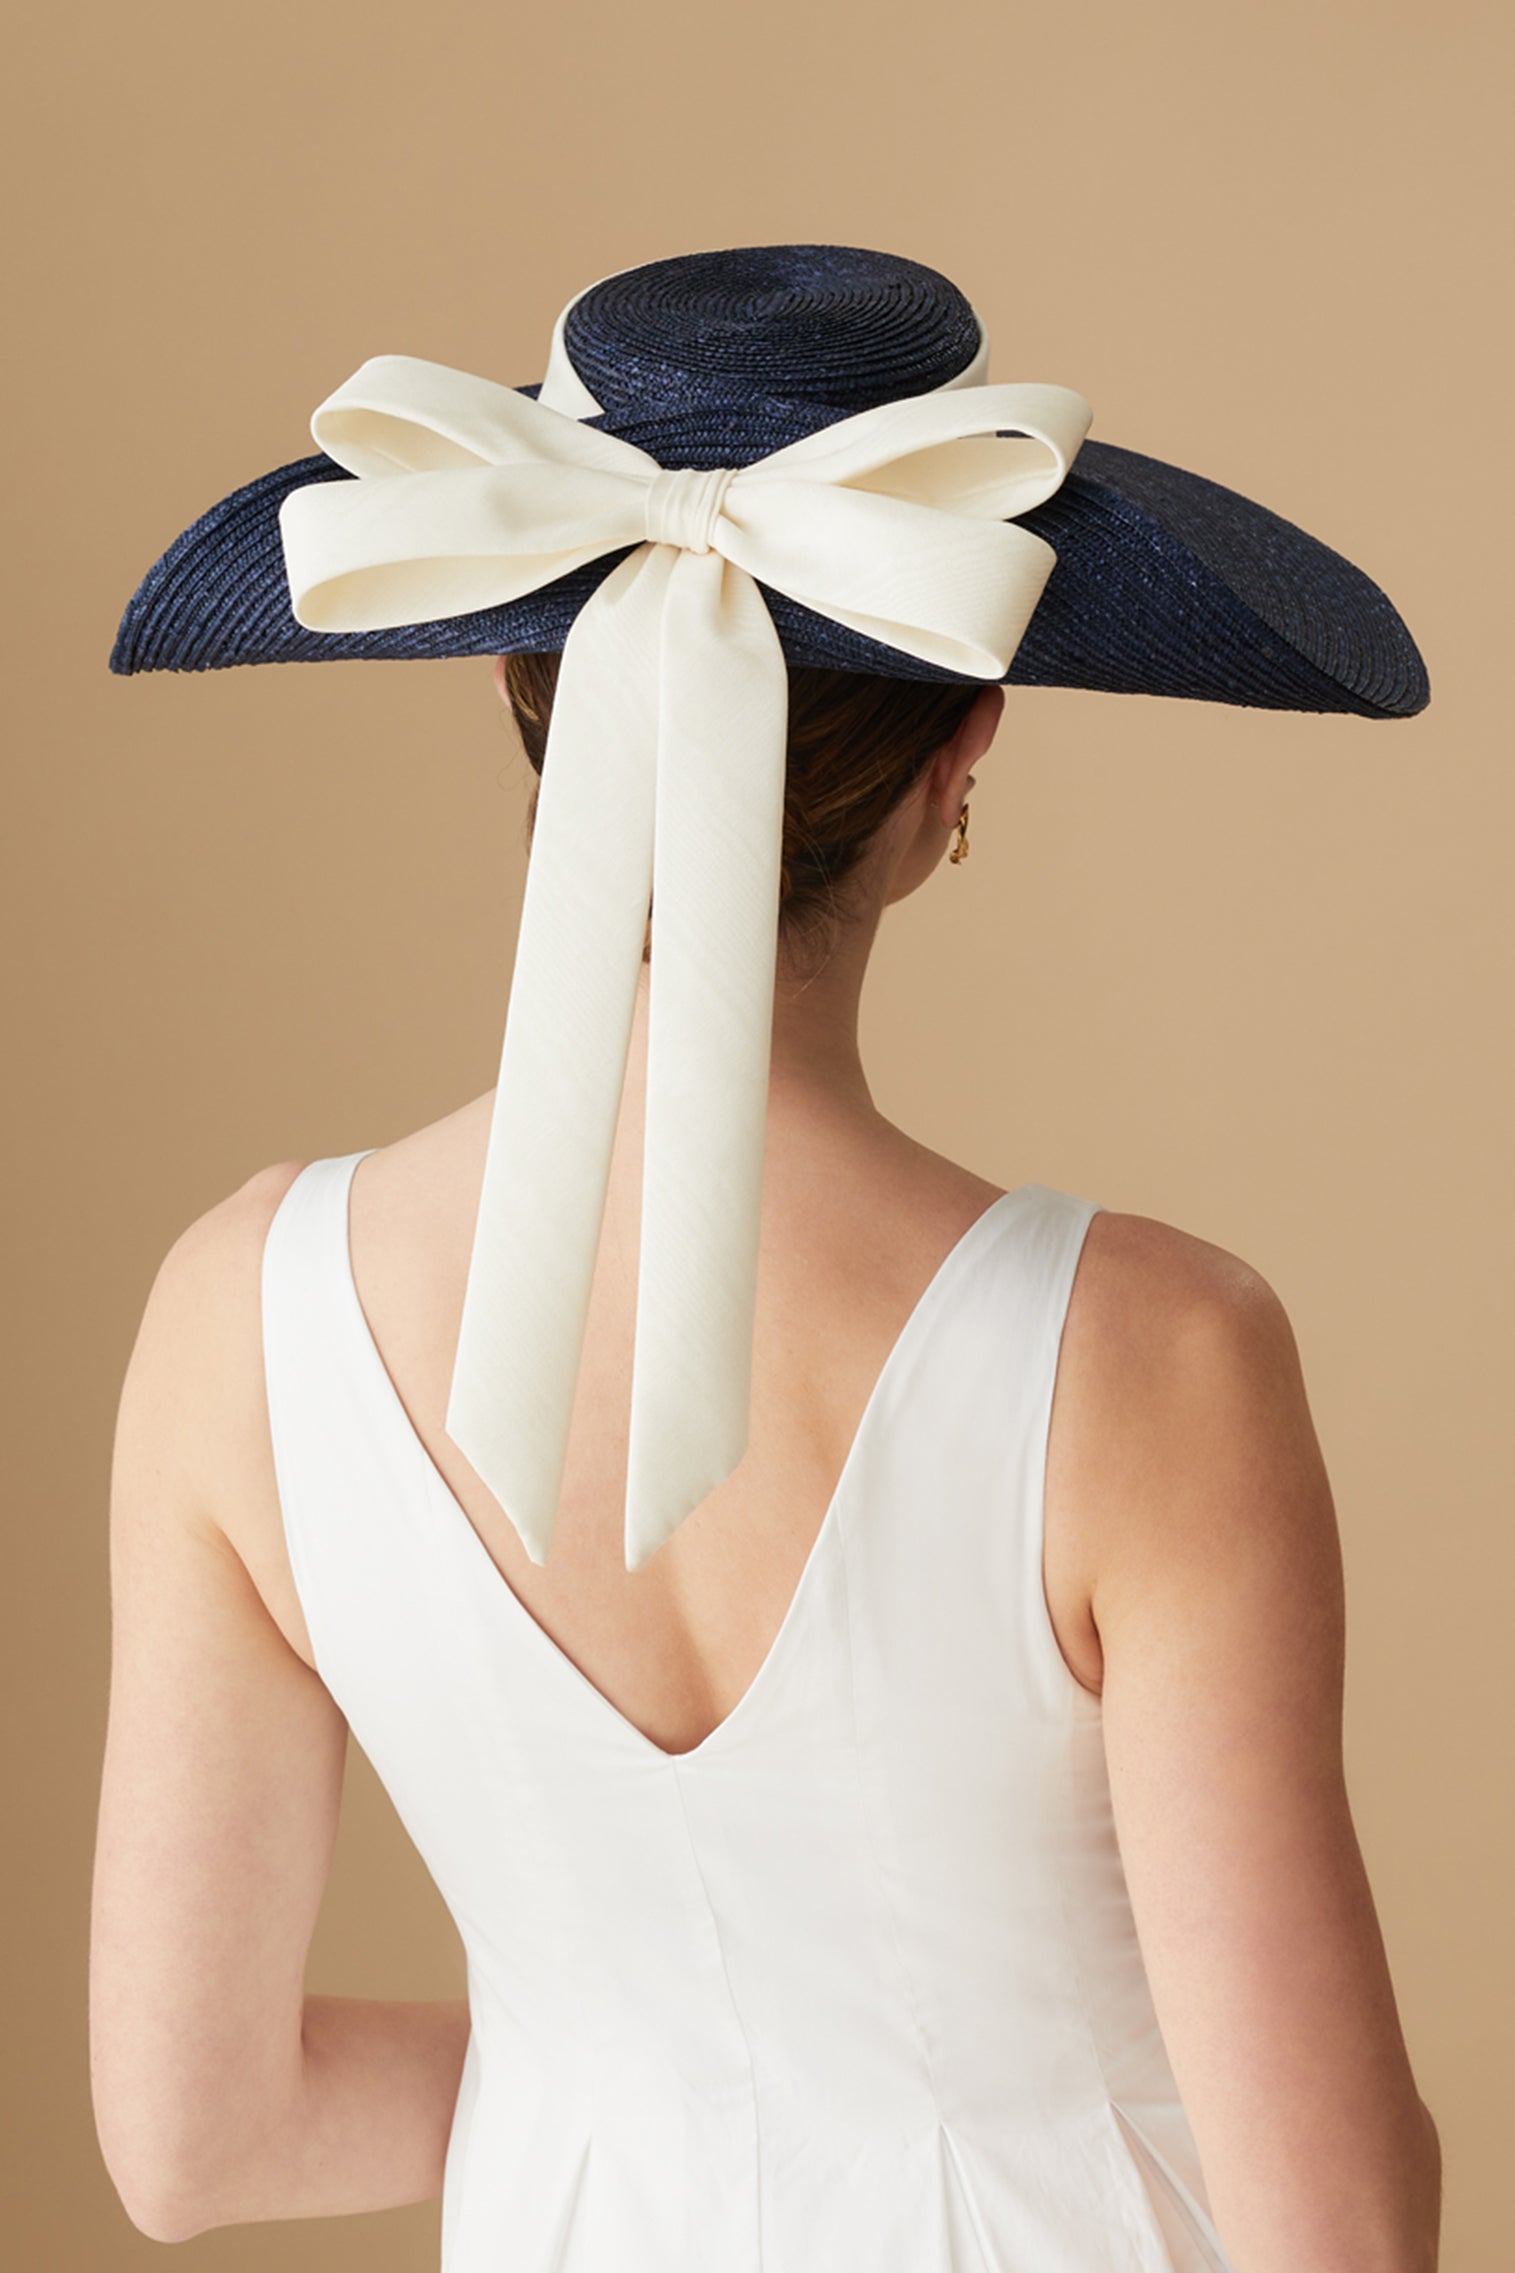 Lady Grey Navy Wide Brim Hat - Hats for Tall People - Lock & Co. Hatters London UK